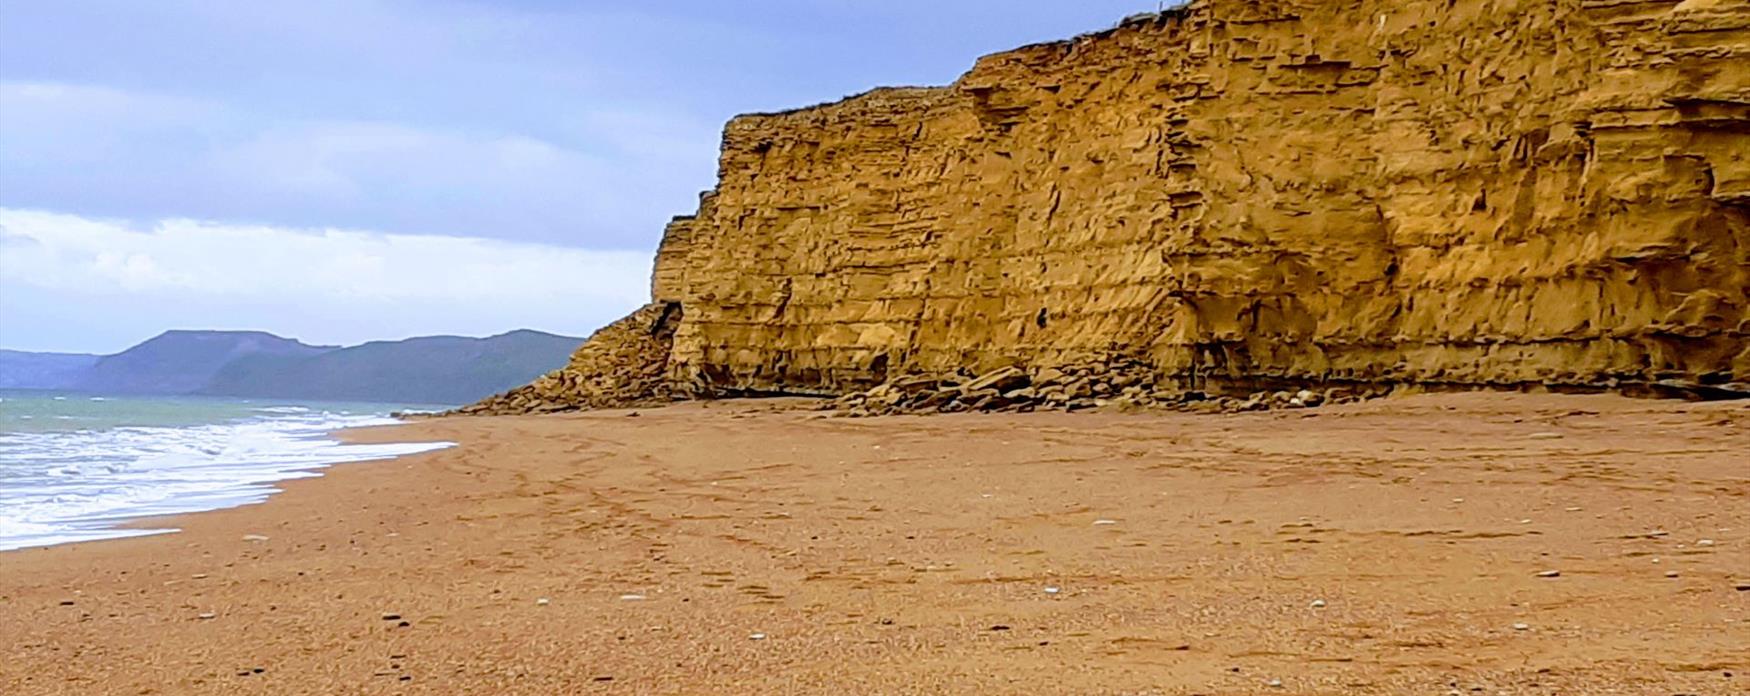 A view of the sandy golden cliffs of Burton Bradstock, slightly contrasting against the browner small pebble beach. The sea to the left of the image is bright blue but with clouds overhead.